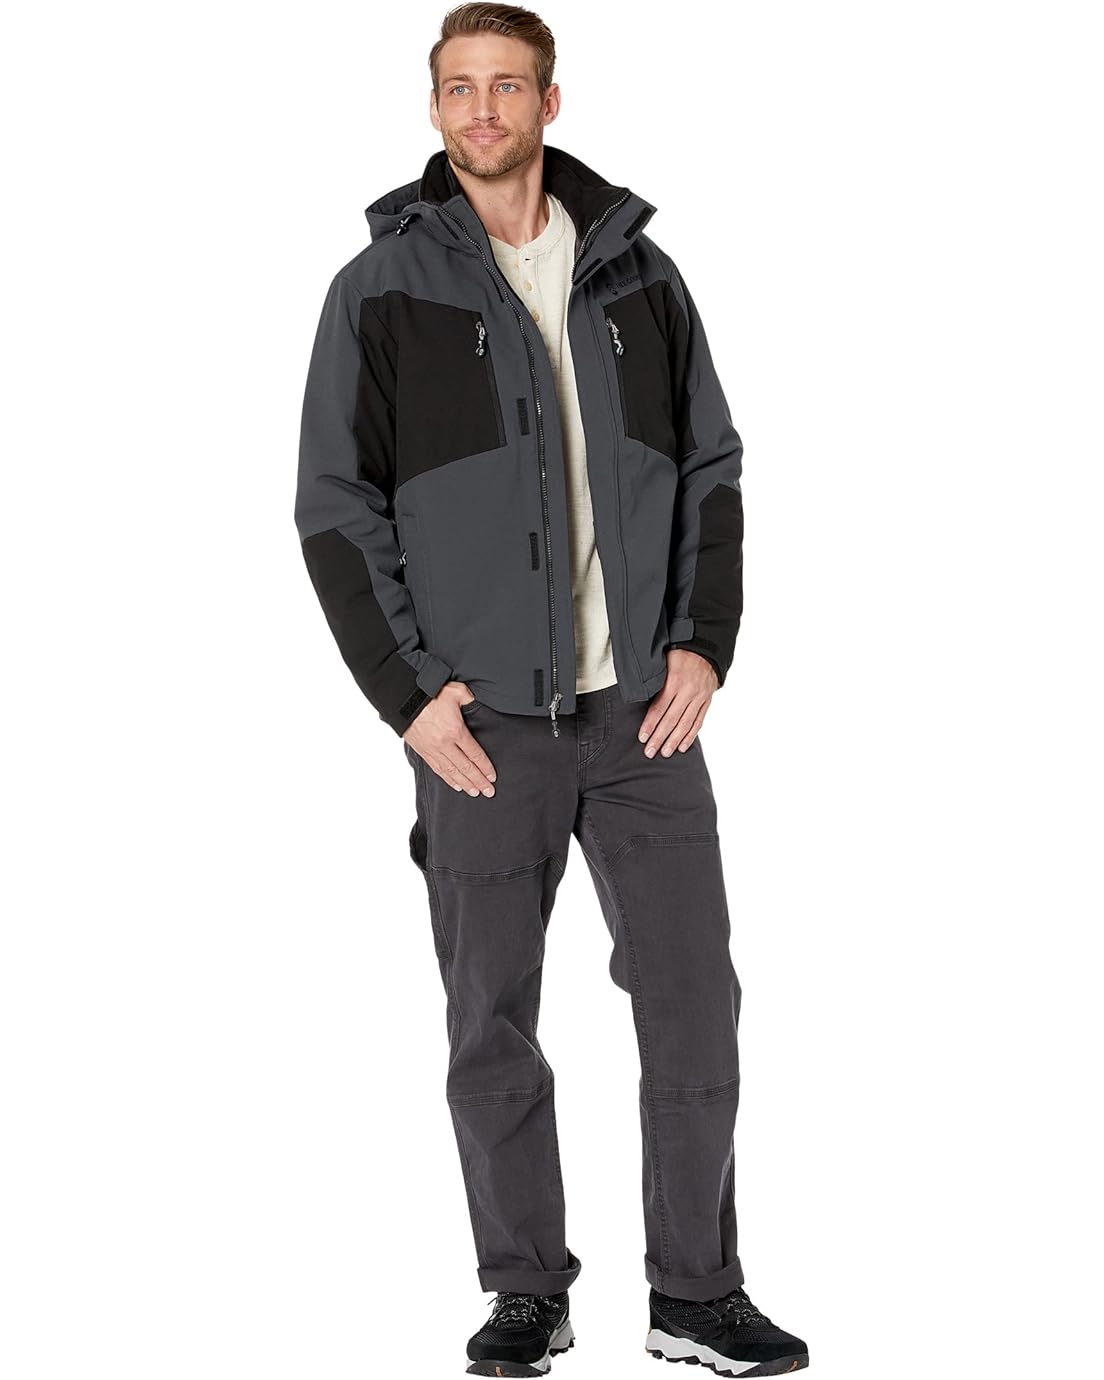  Free Country Softshell Systems Jacket